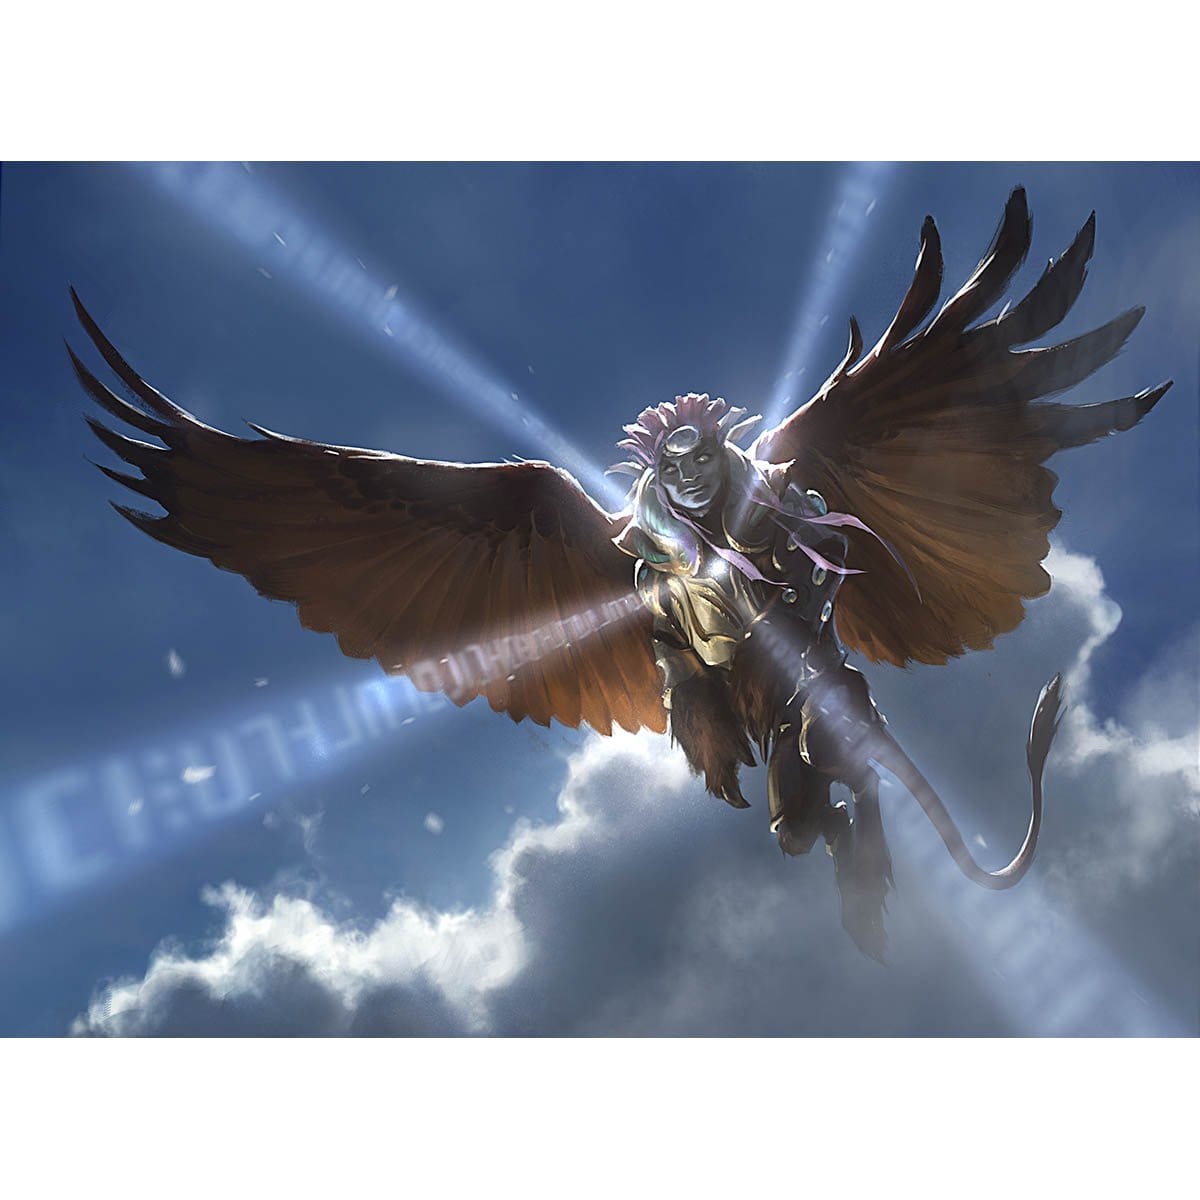 Sphinx's Revelation Print - Print - Original Magic Art - Accessories for Magic the Gathering and other card games